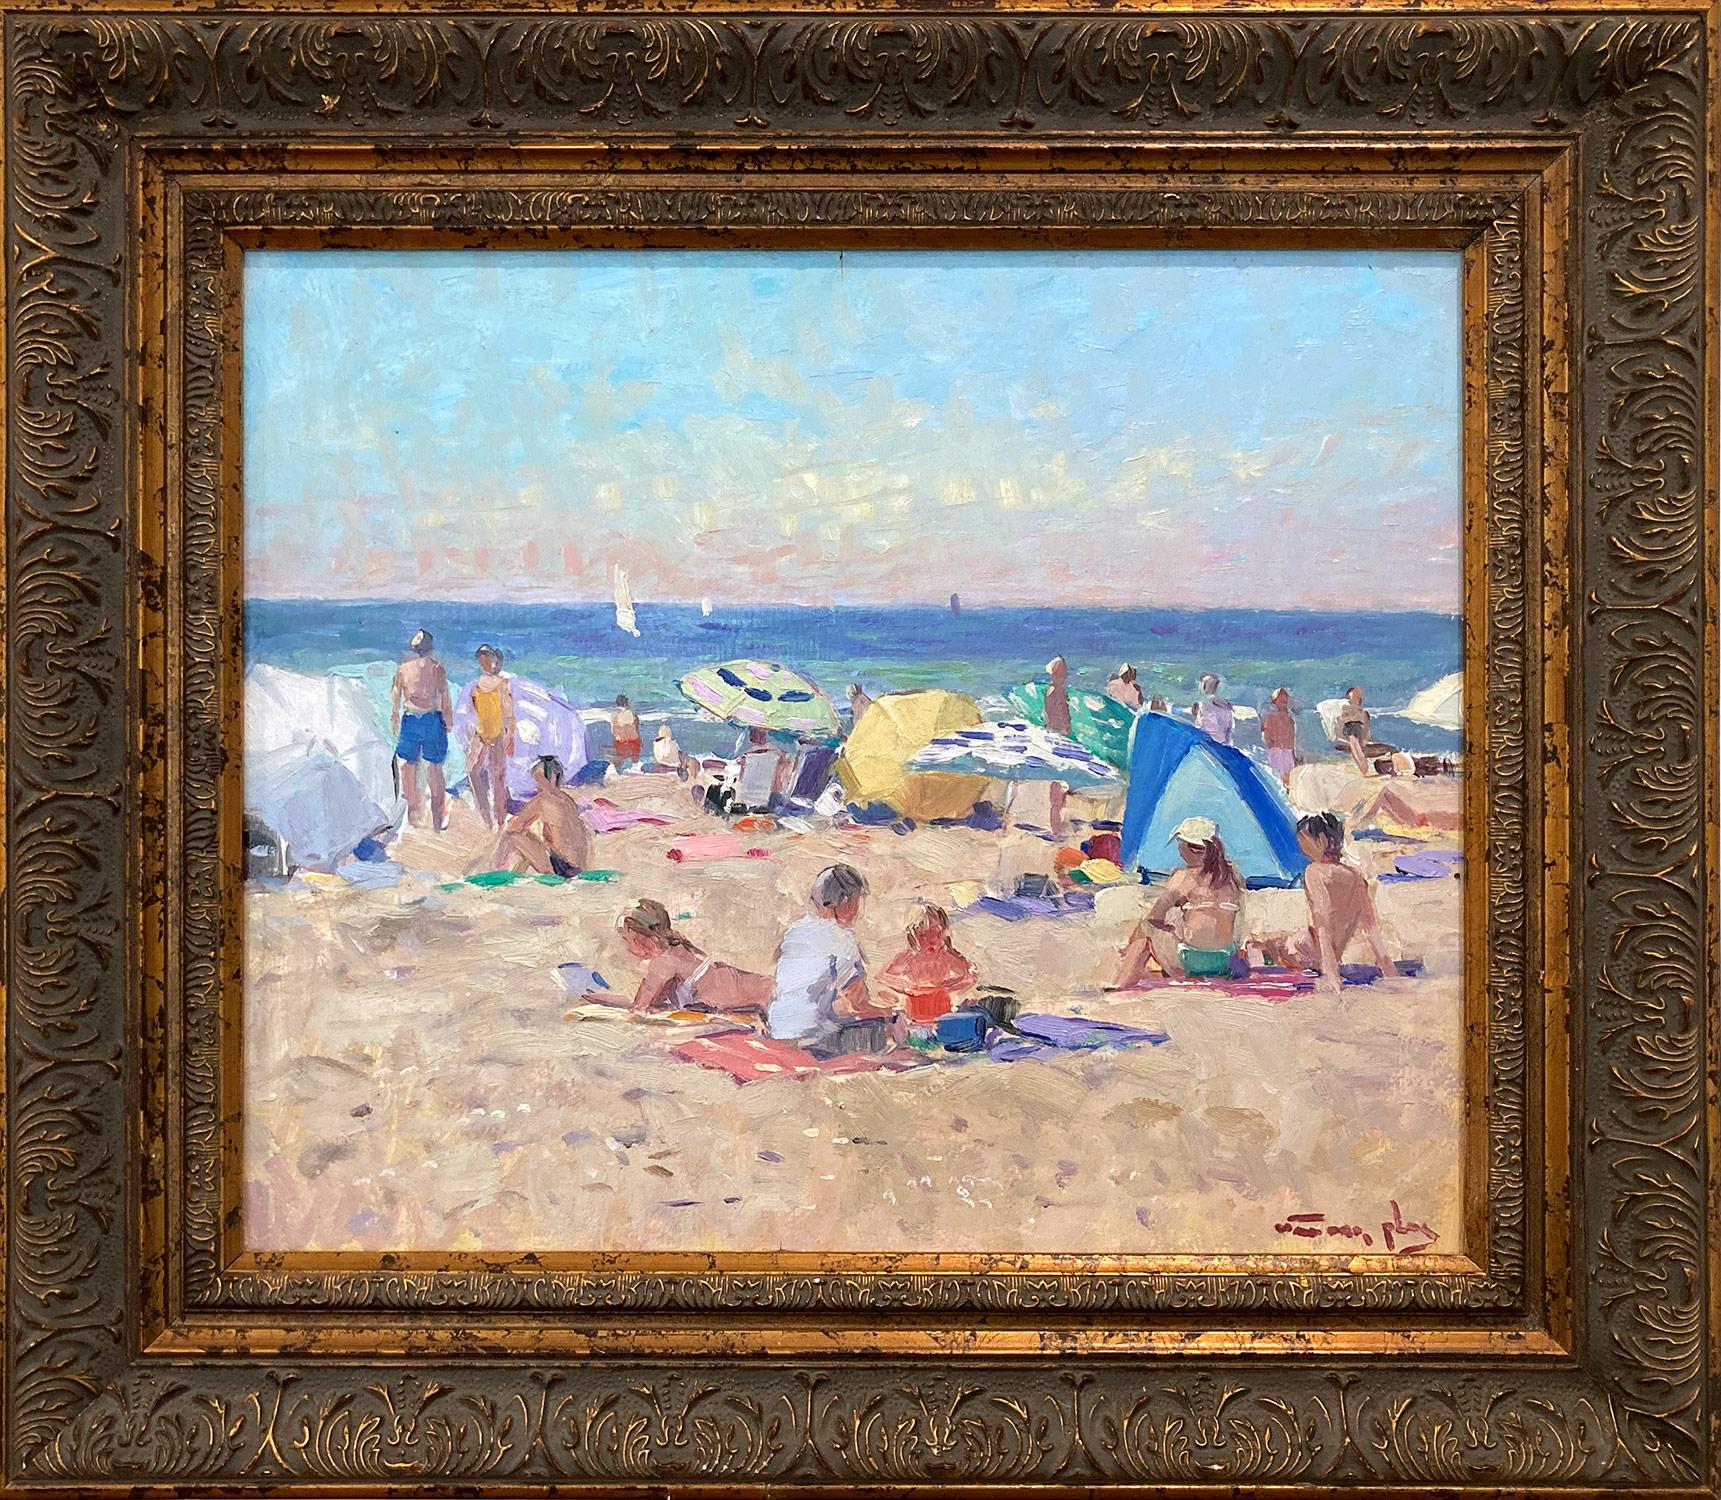 "Summer Day at the Beach" Oil Painting Scene with Figures, Umbrellas & Boats